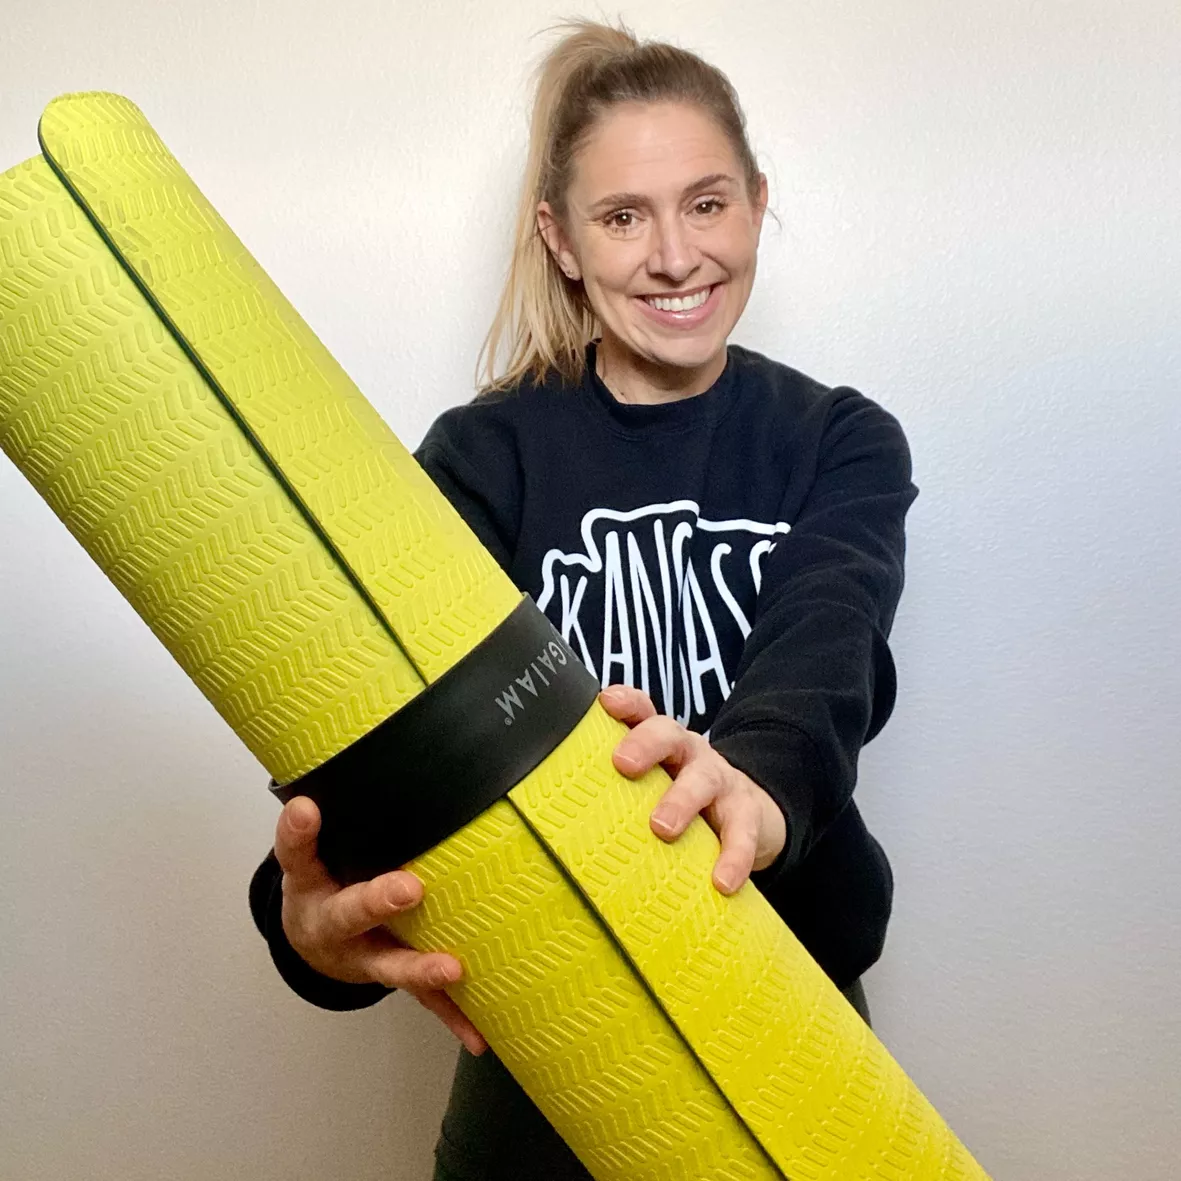 Yoga Mat Is Modeled After Slap-On Wristbands 